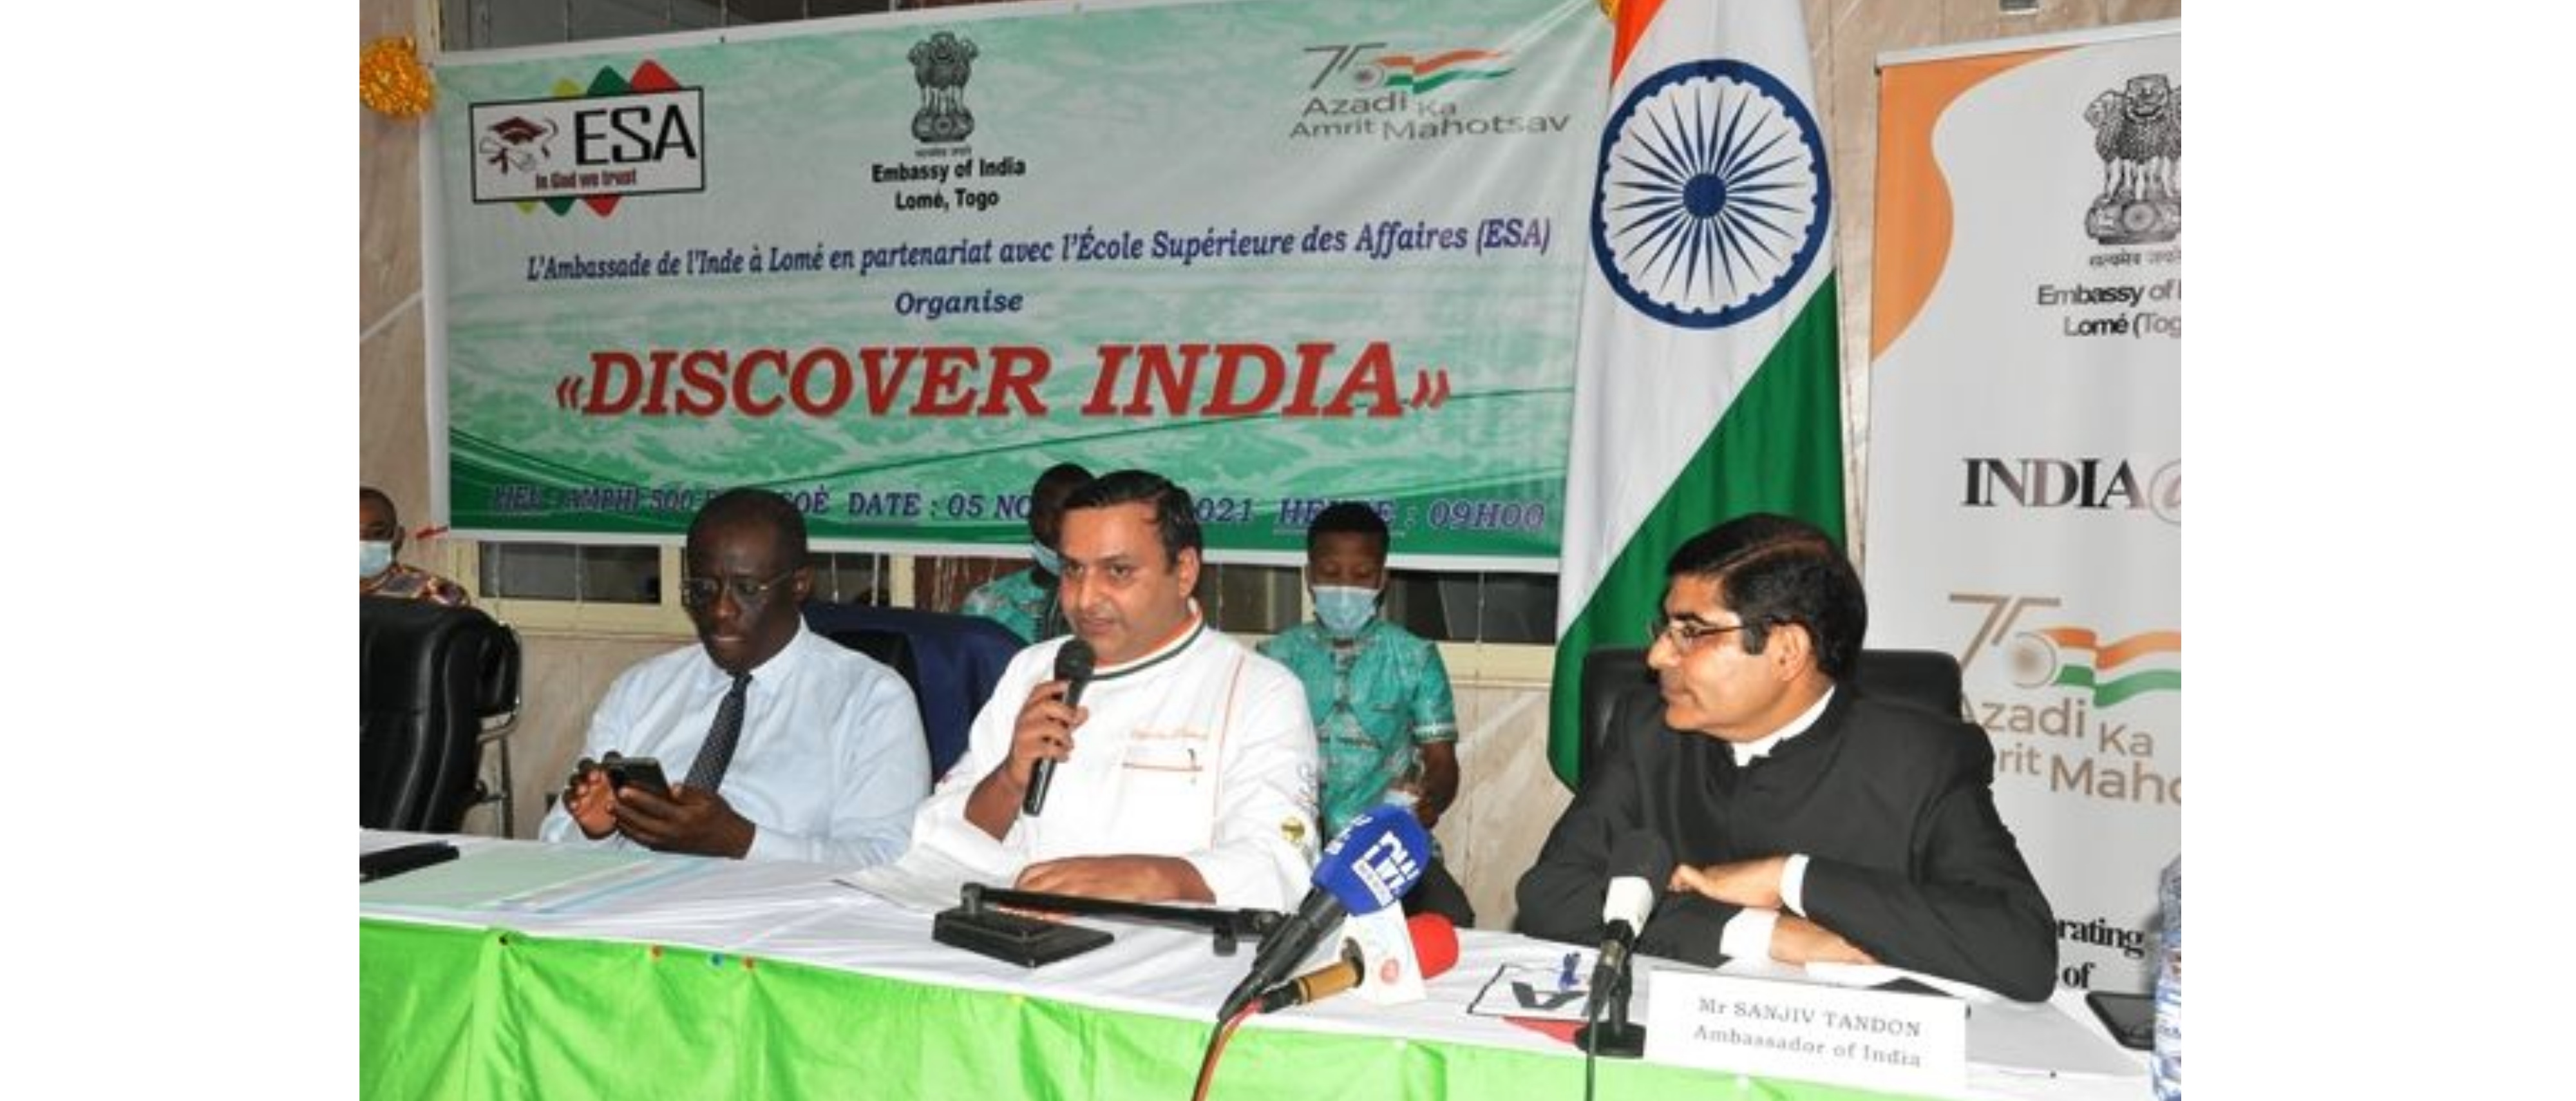  On 05 November 2021, Embassy of India in Lomé in partnership with Ecole Supérieure des Affaires (ESA) university organized a “Discover India” event to strengthen linkages in the field of higher education and skill development between India and Togo.